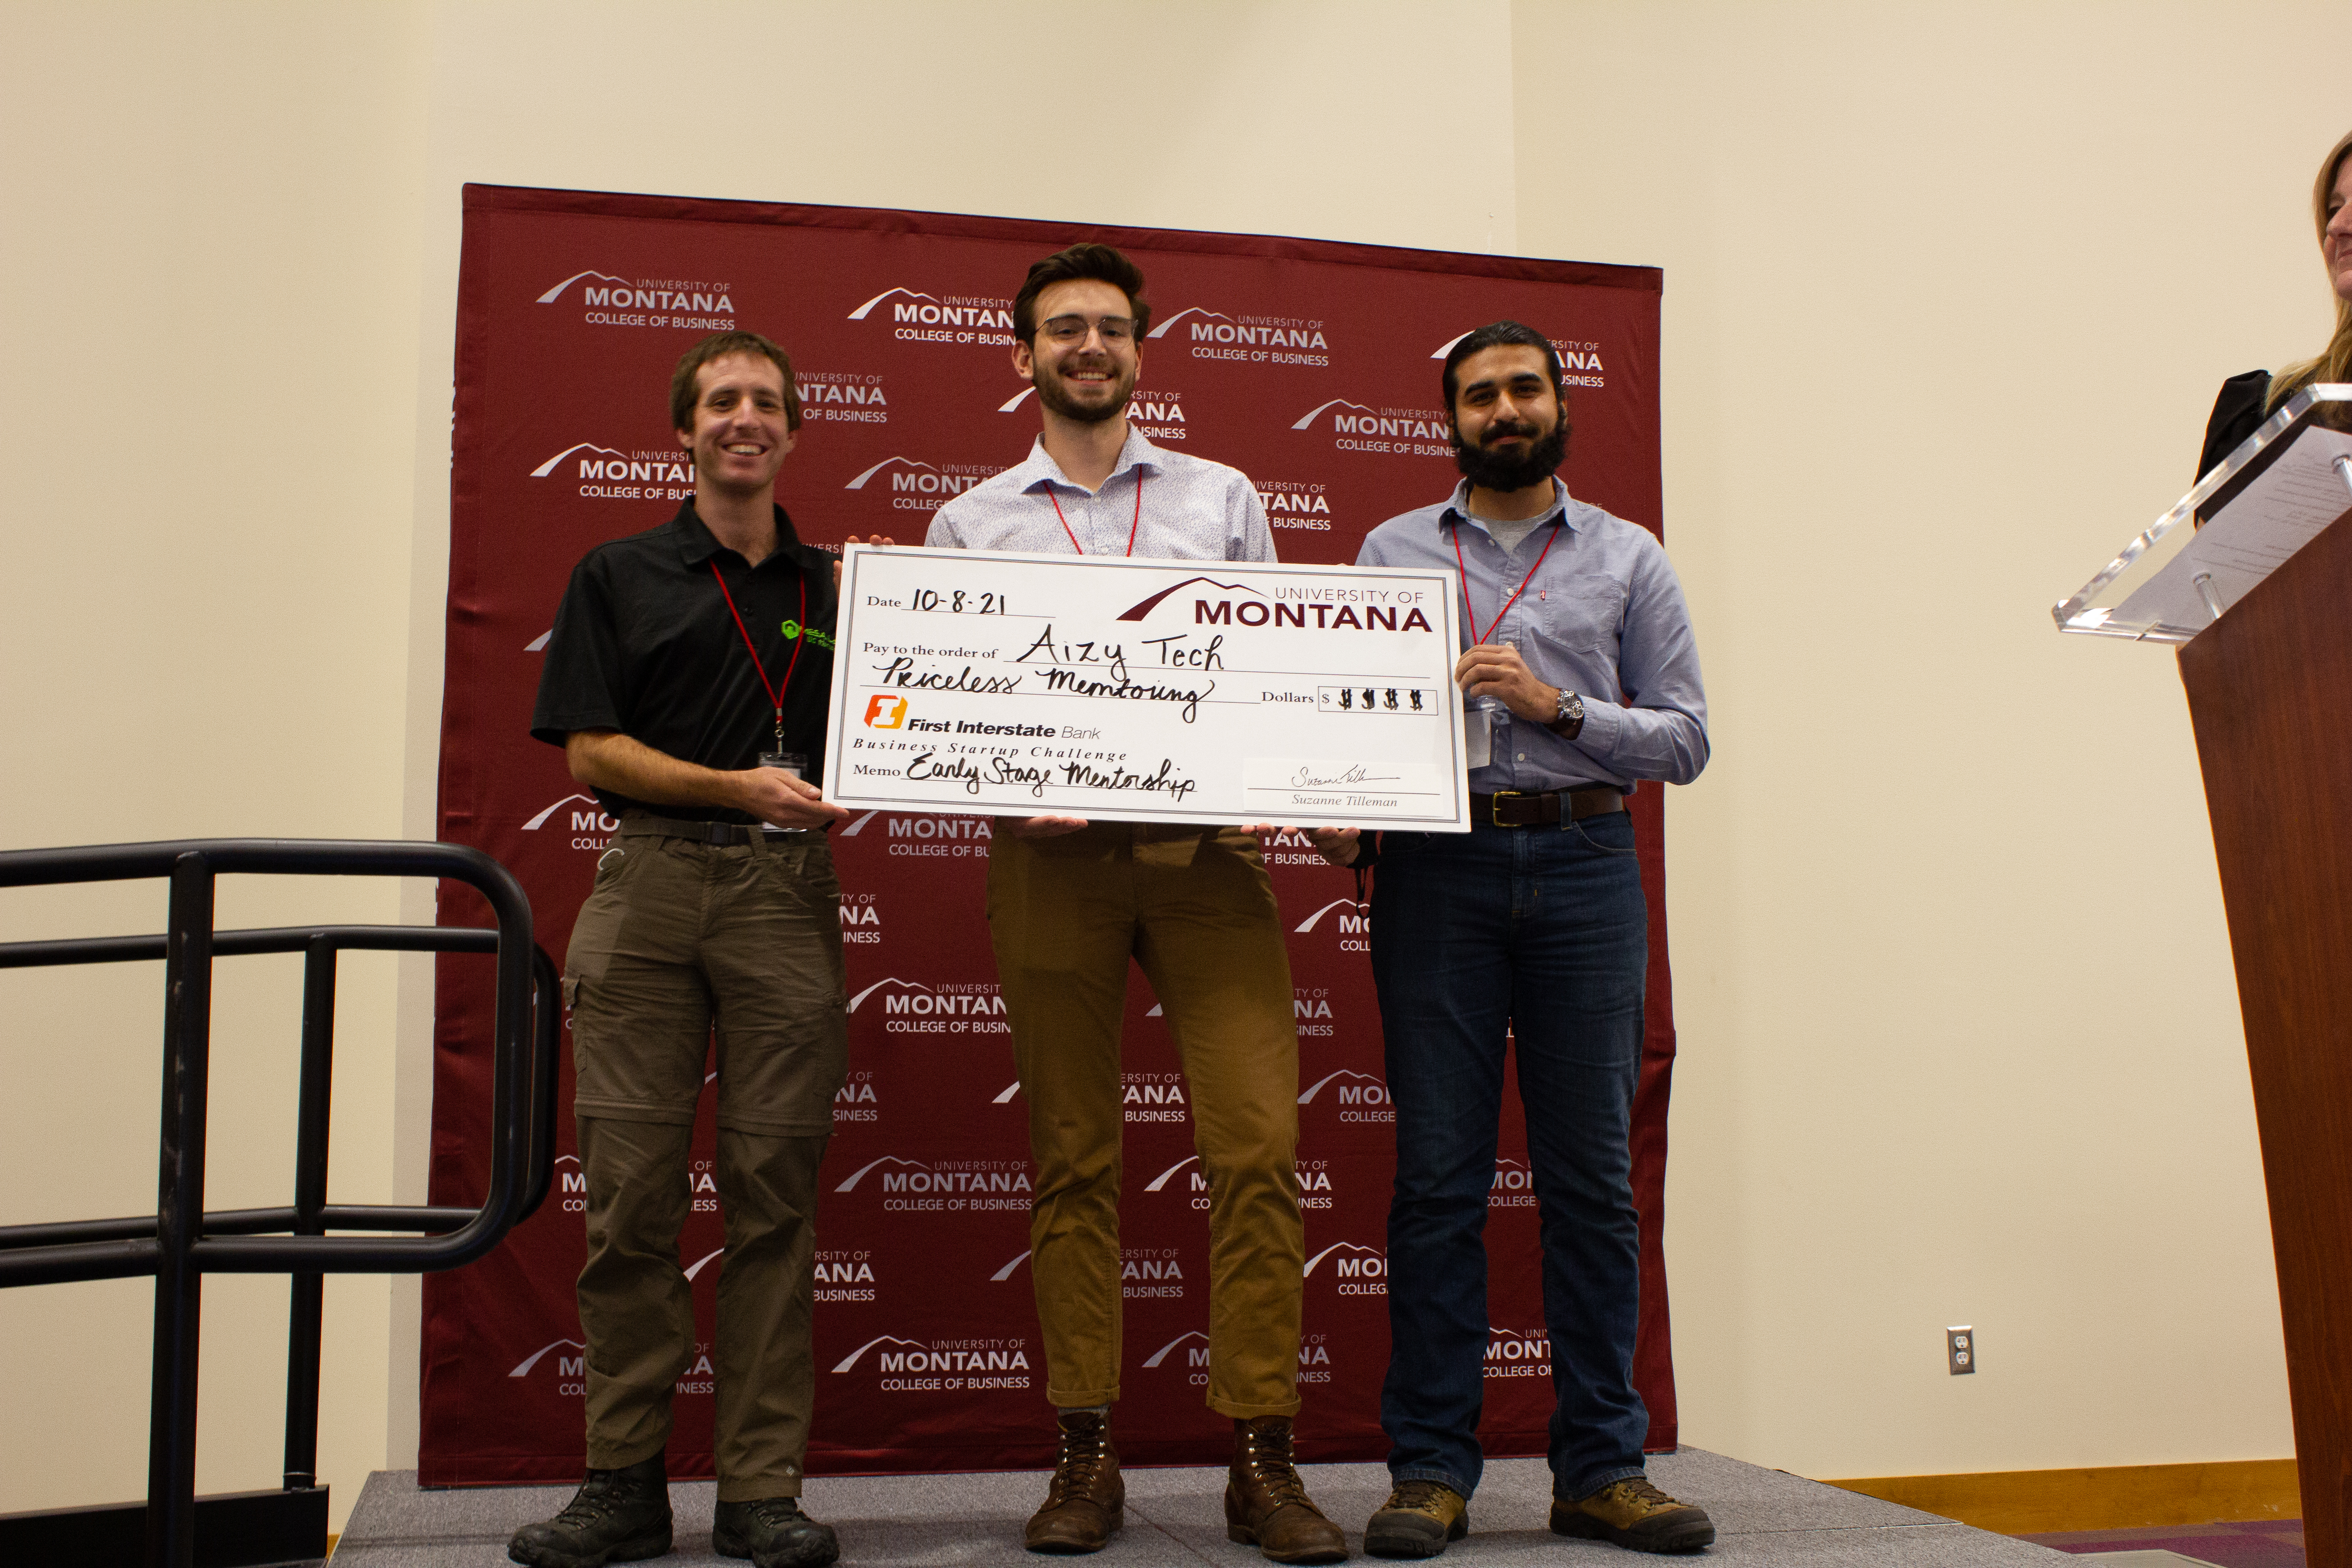 Prize Awarded to Aizy Tech